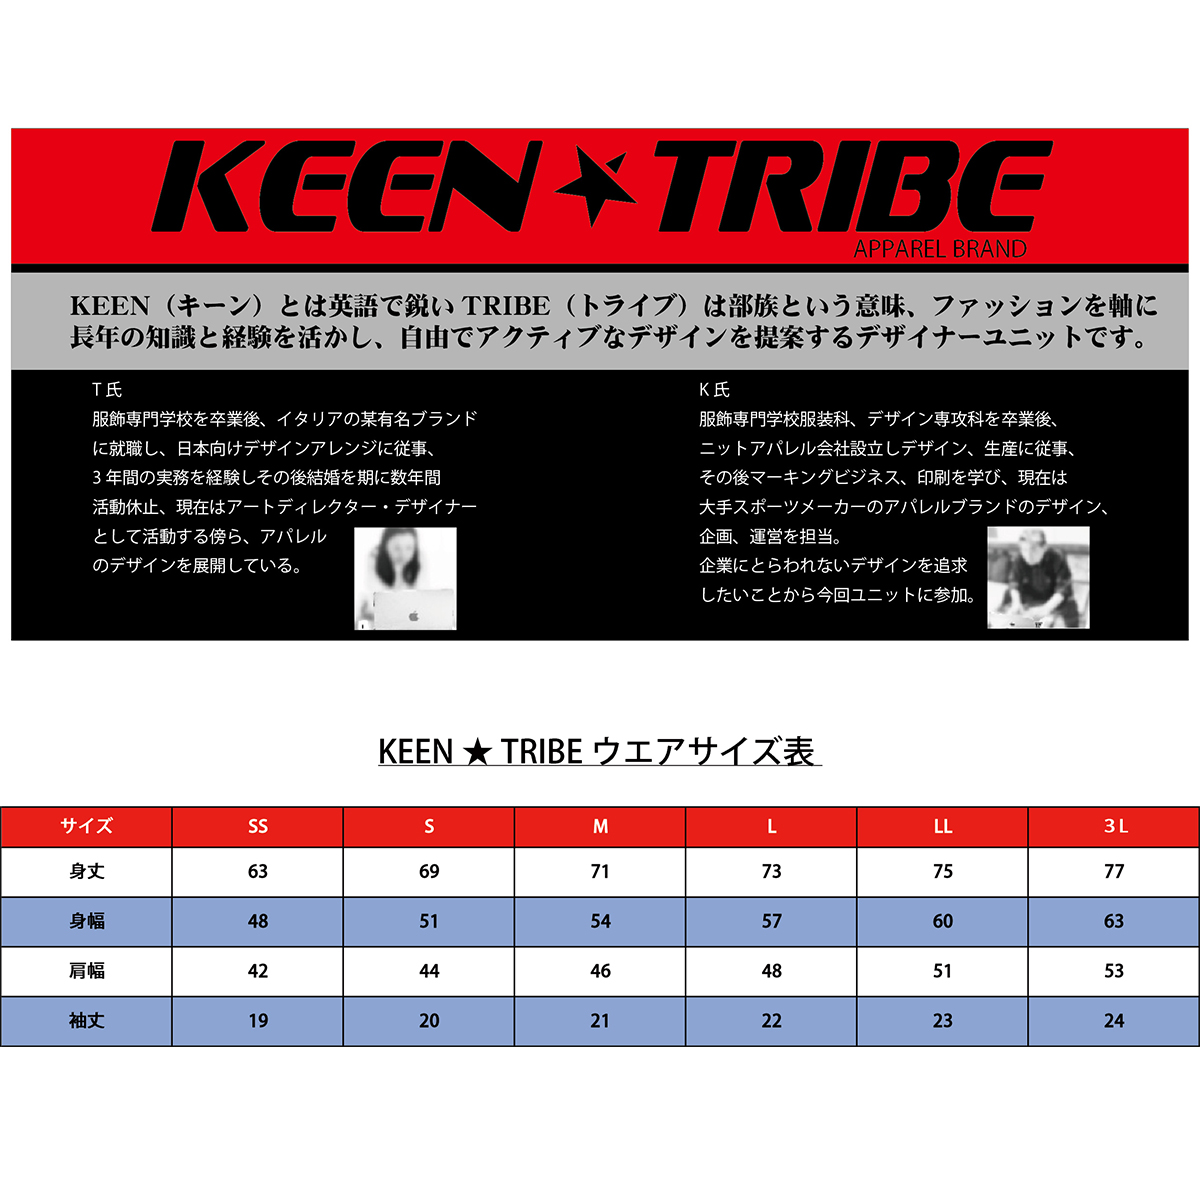 KEEN ★ TRIBE　KT-19(受注生産)